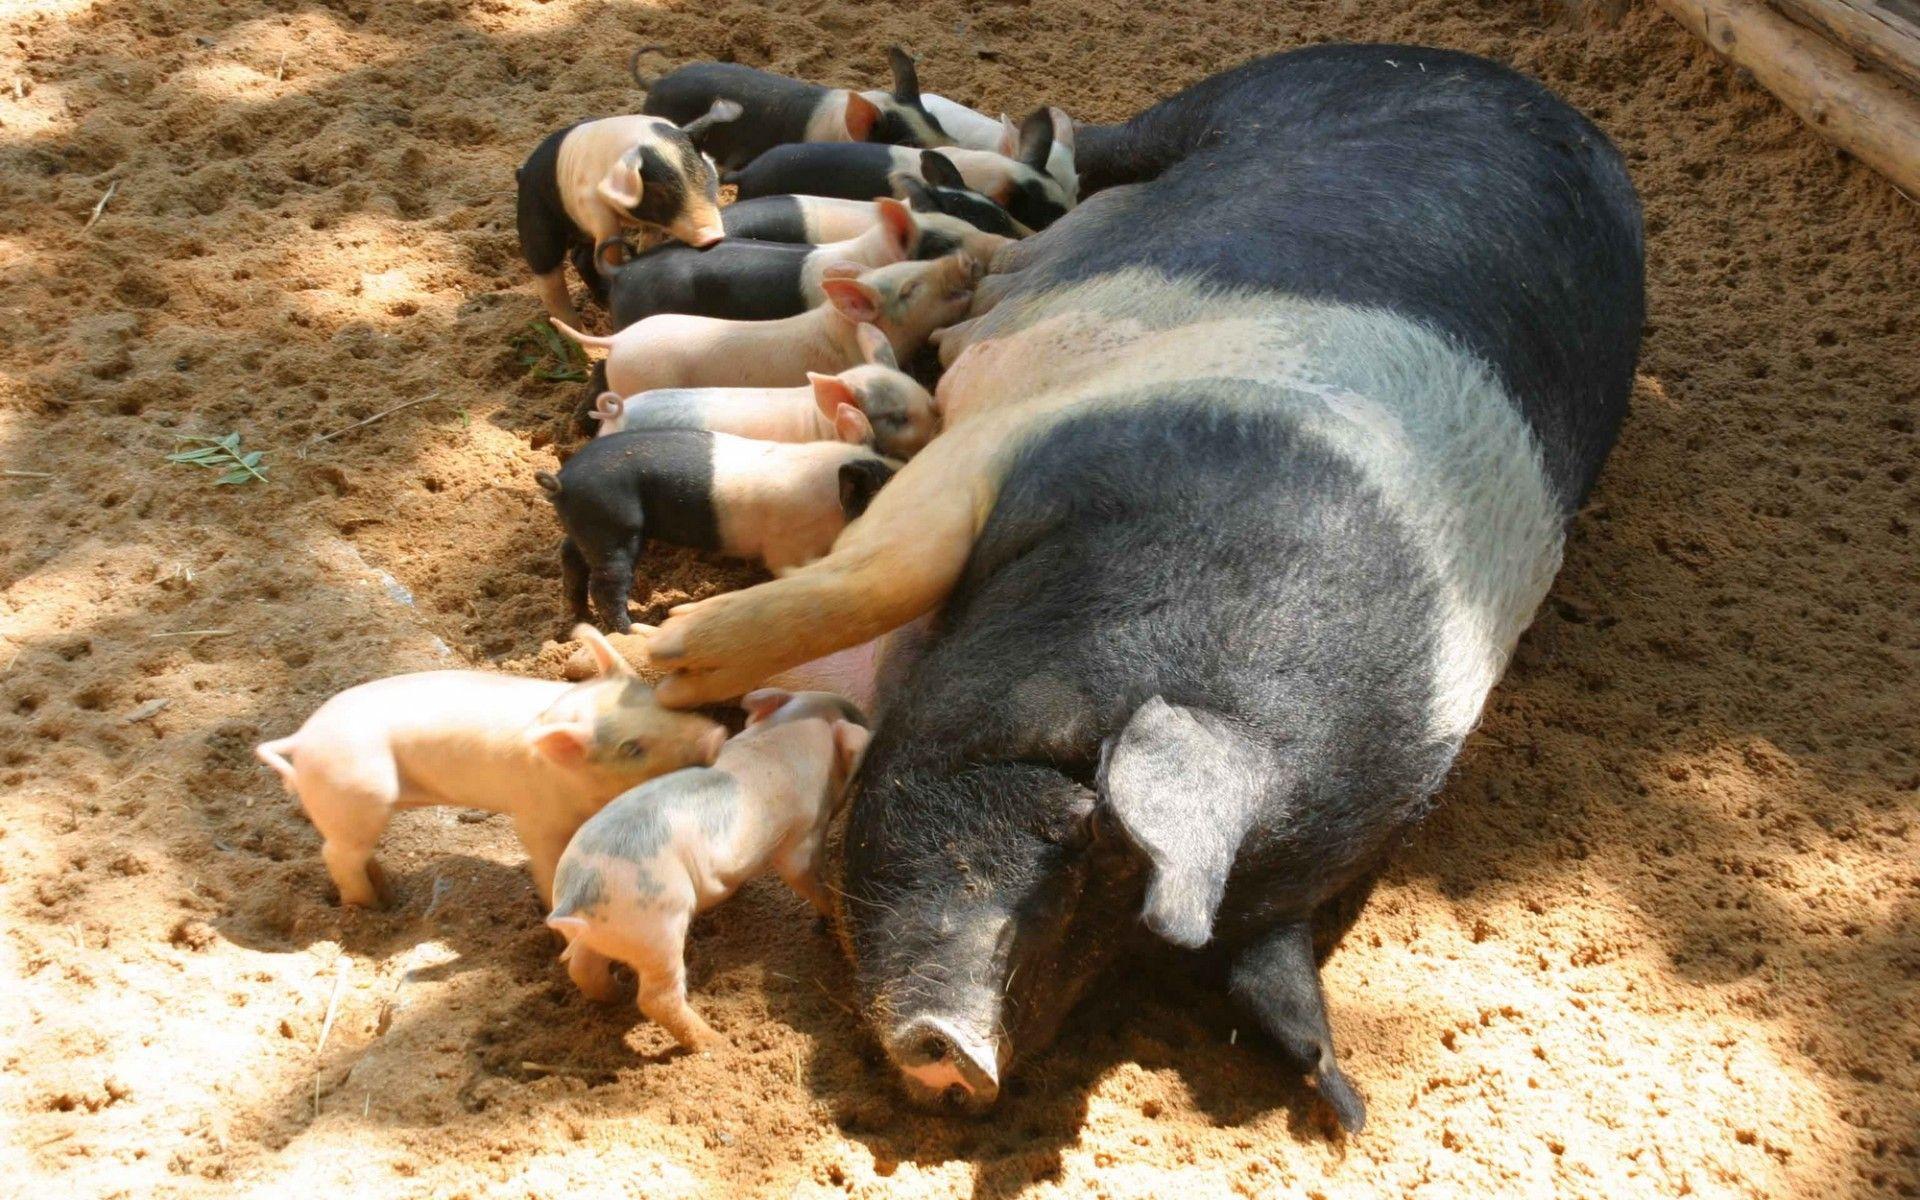 Pig with piglets wallpaper and image, picture, photo